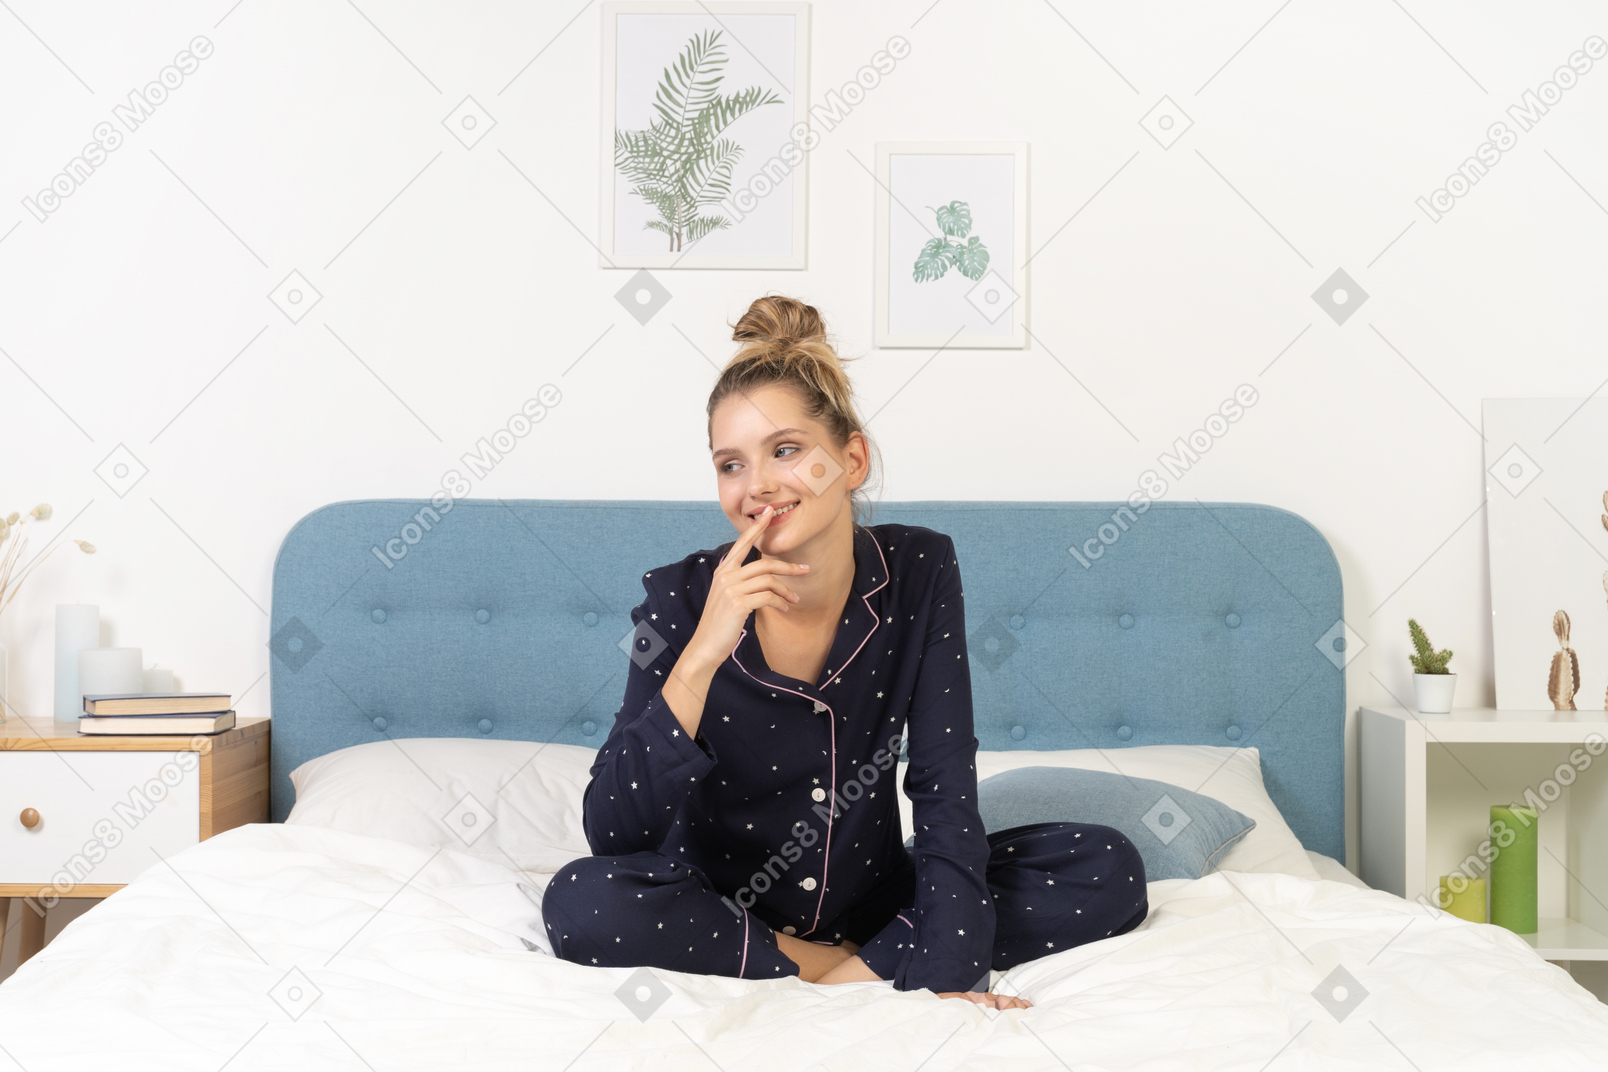 Front view of a pleased thoughtful young woman in pajamas staying in bed